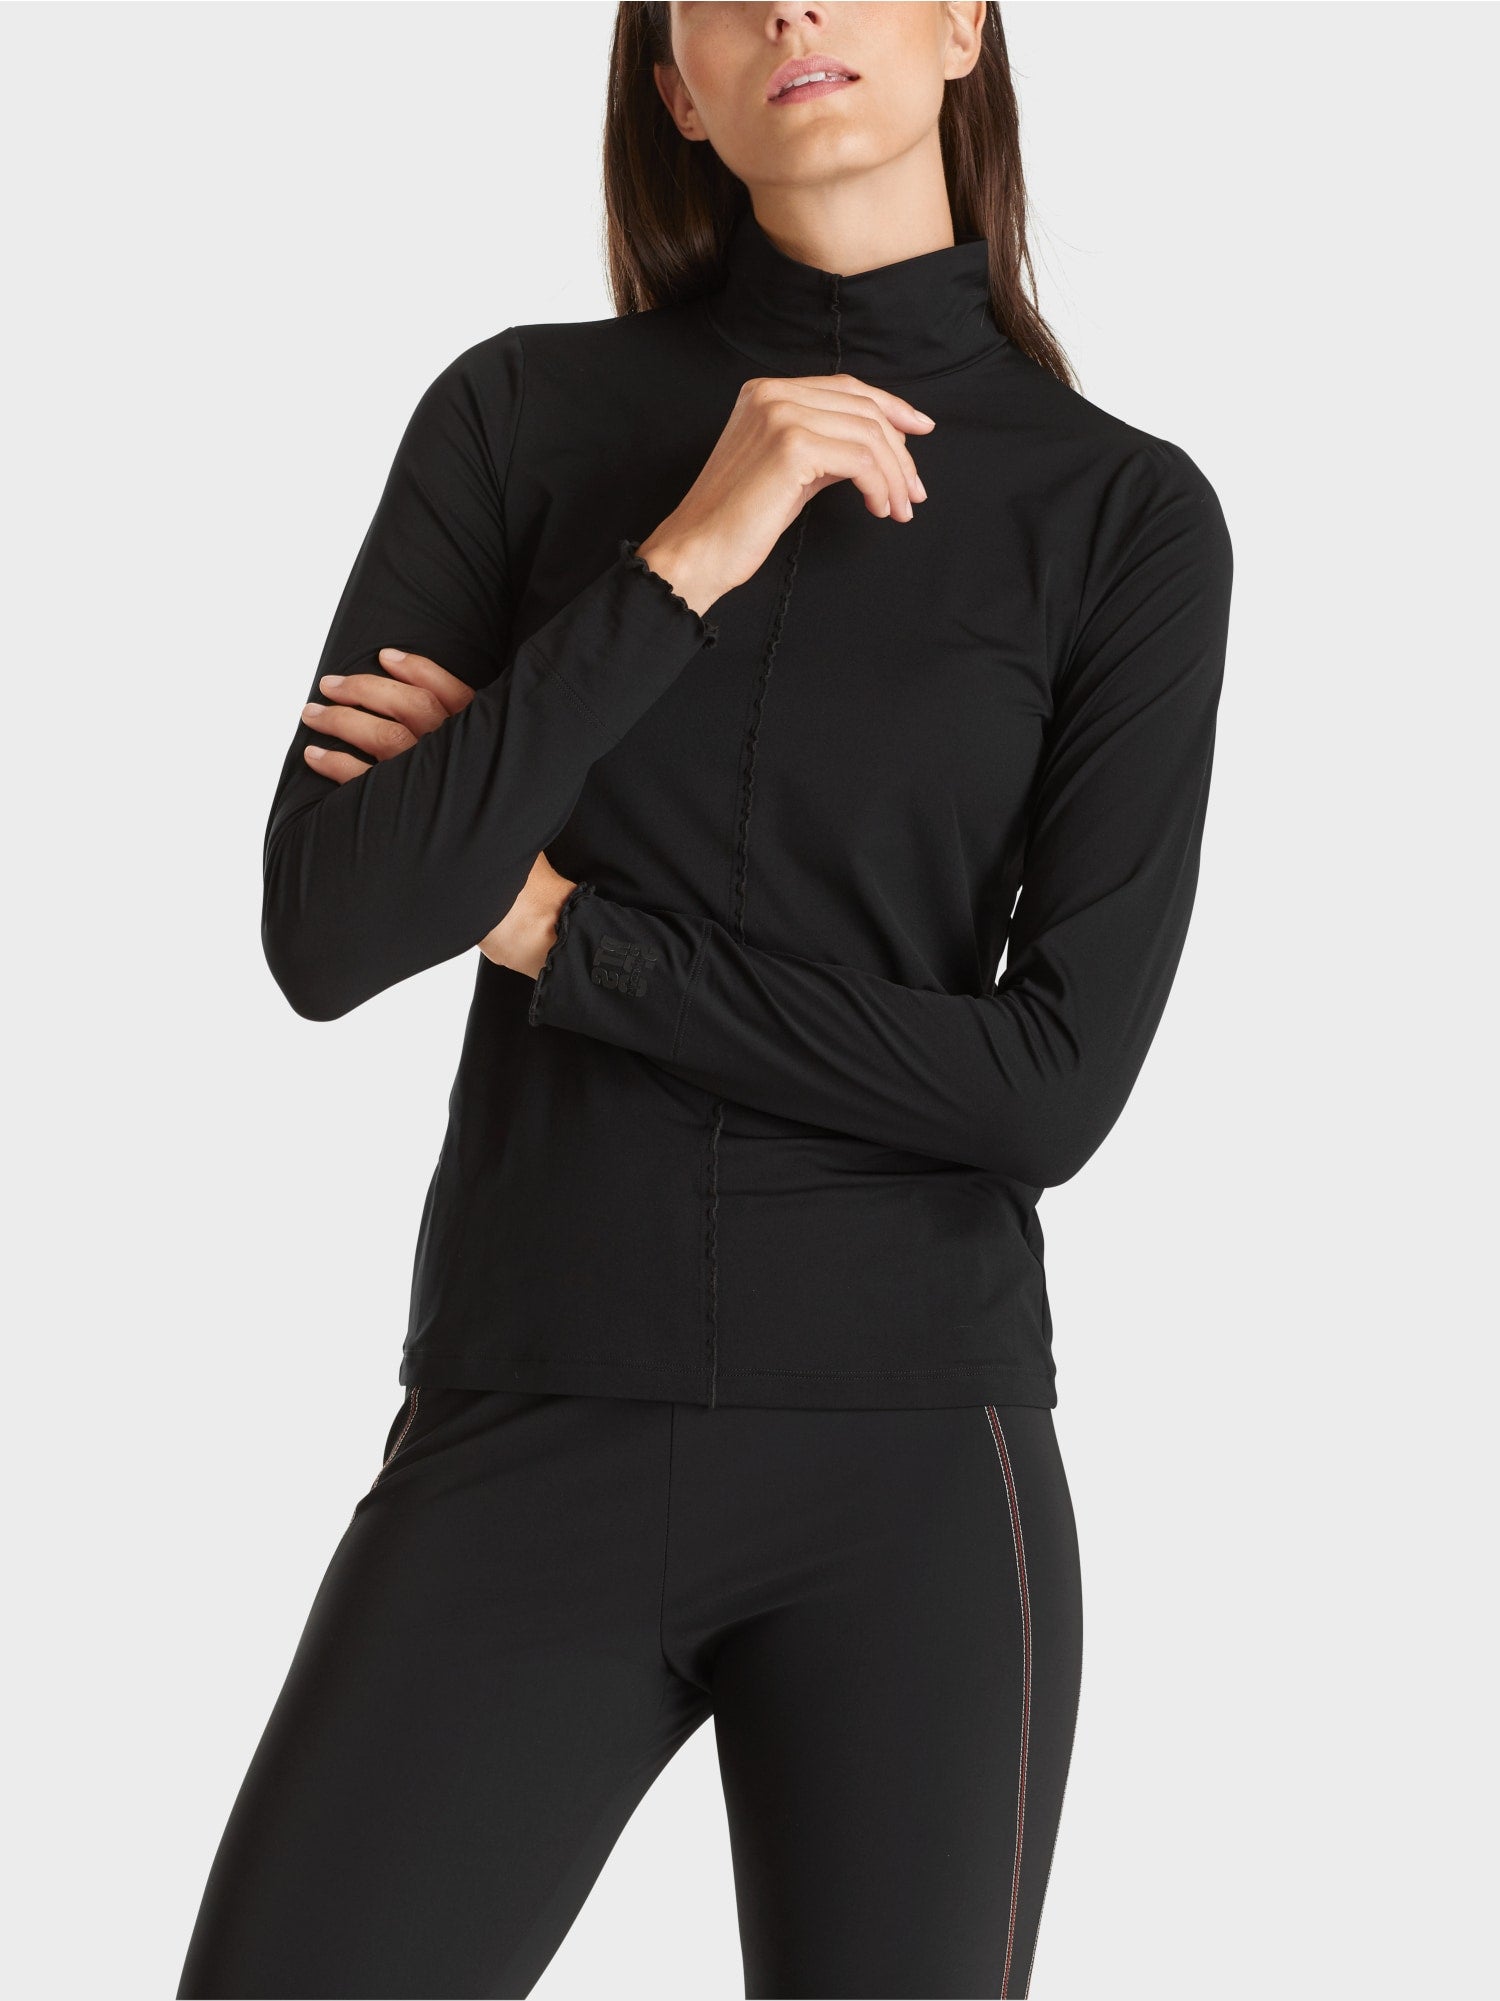 Black Second Skin Polo Top